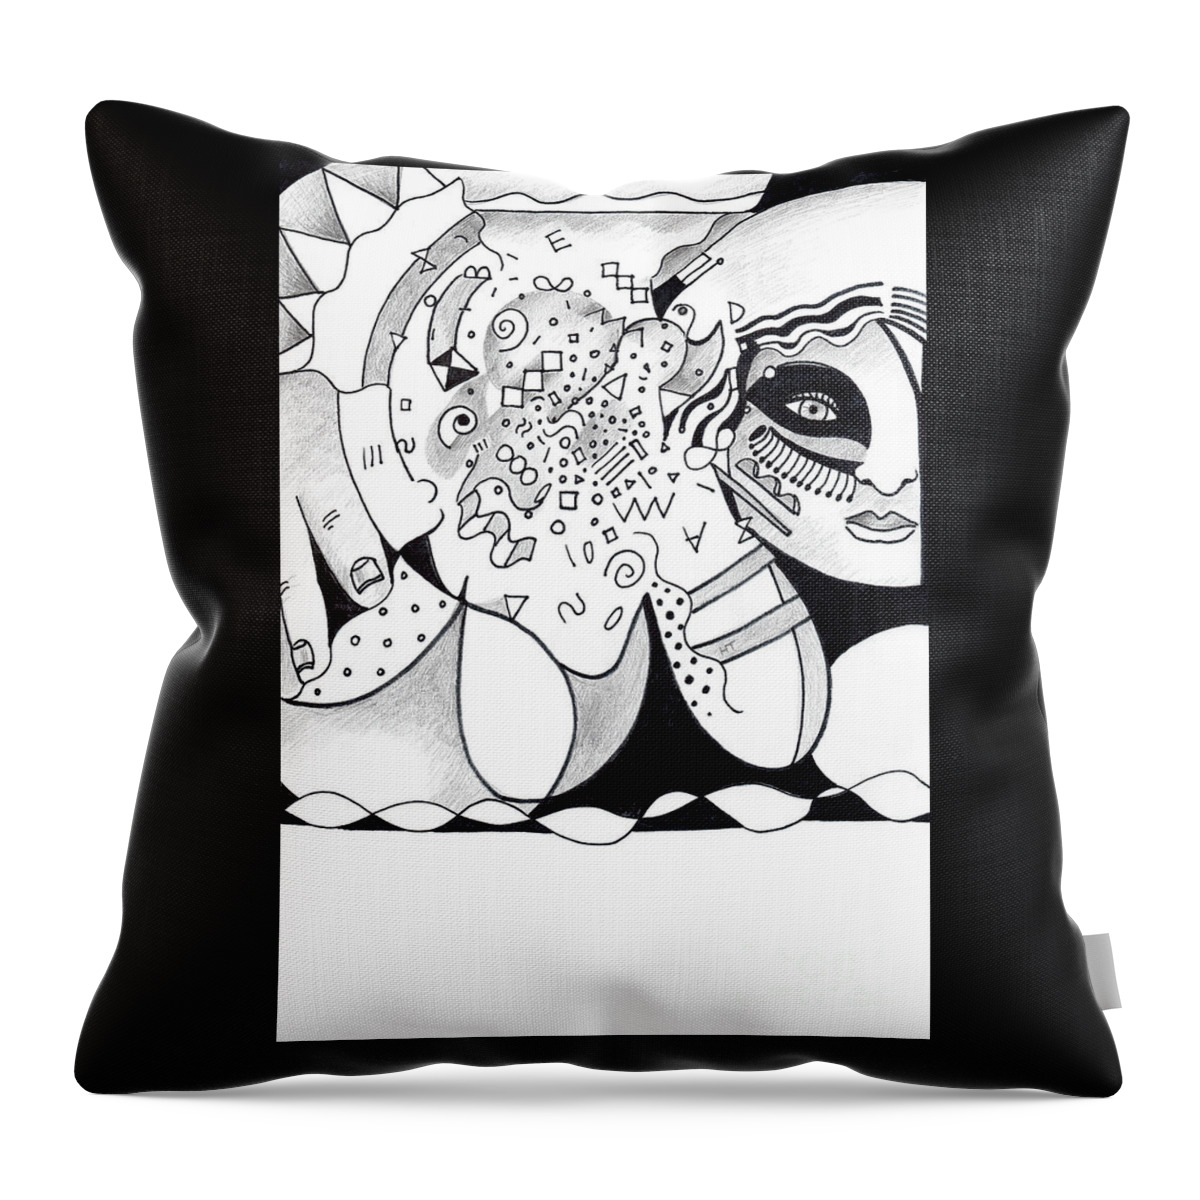 The Dark Feminine Throw Pillow featuring the drawing Then There Is That by Helena Tiainen